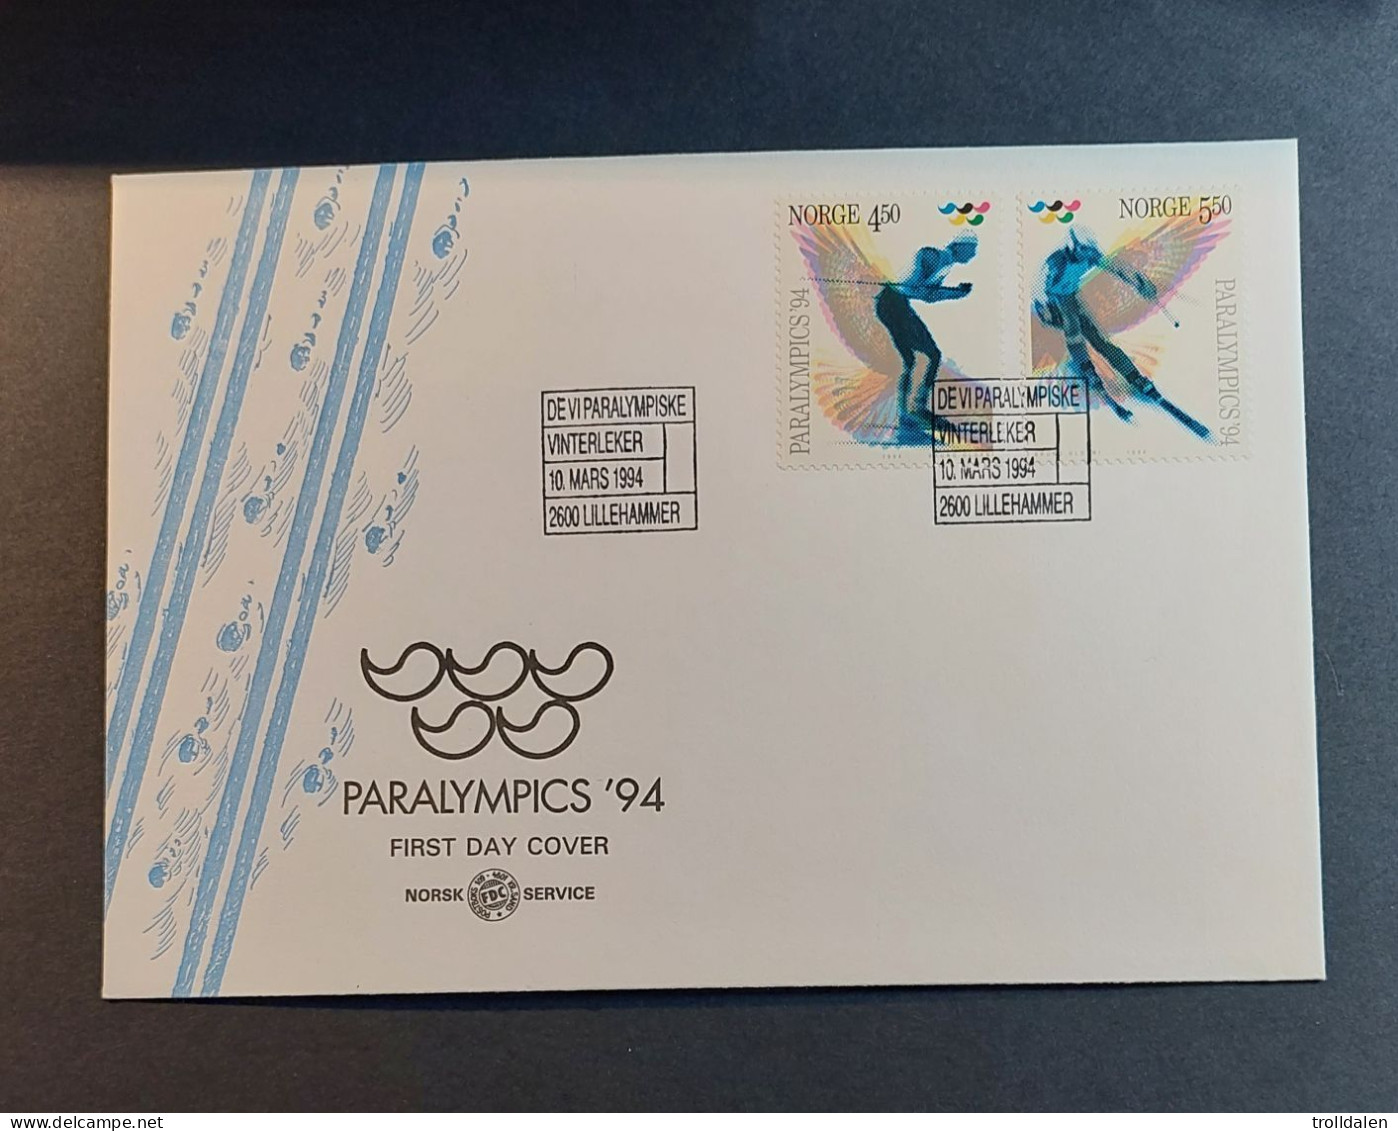 Norway FDC 1994 - FDC